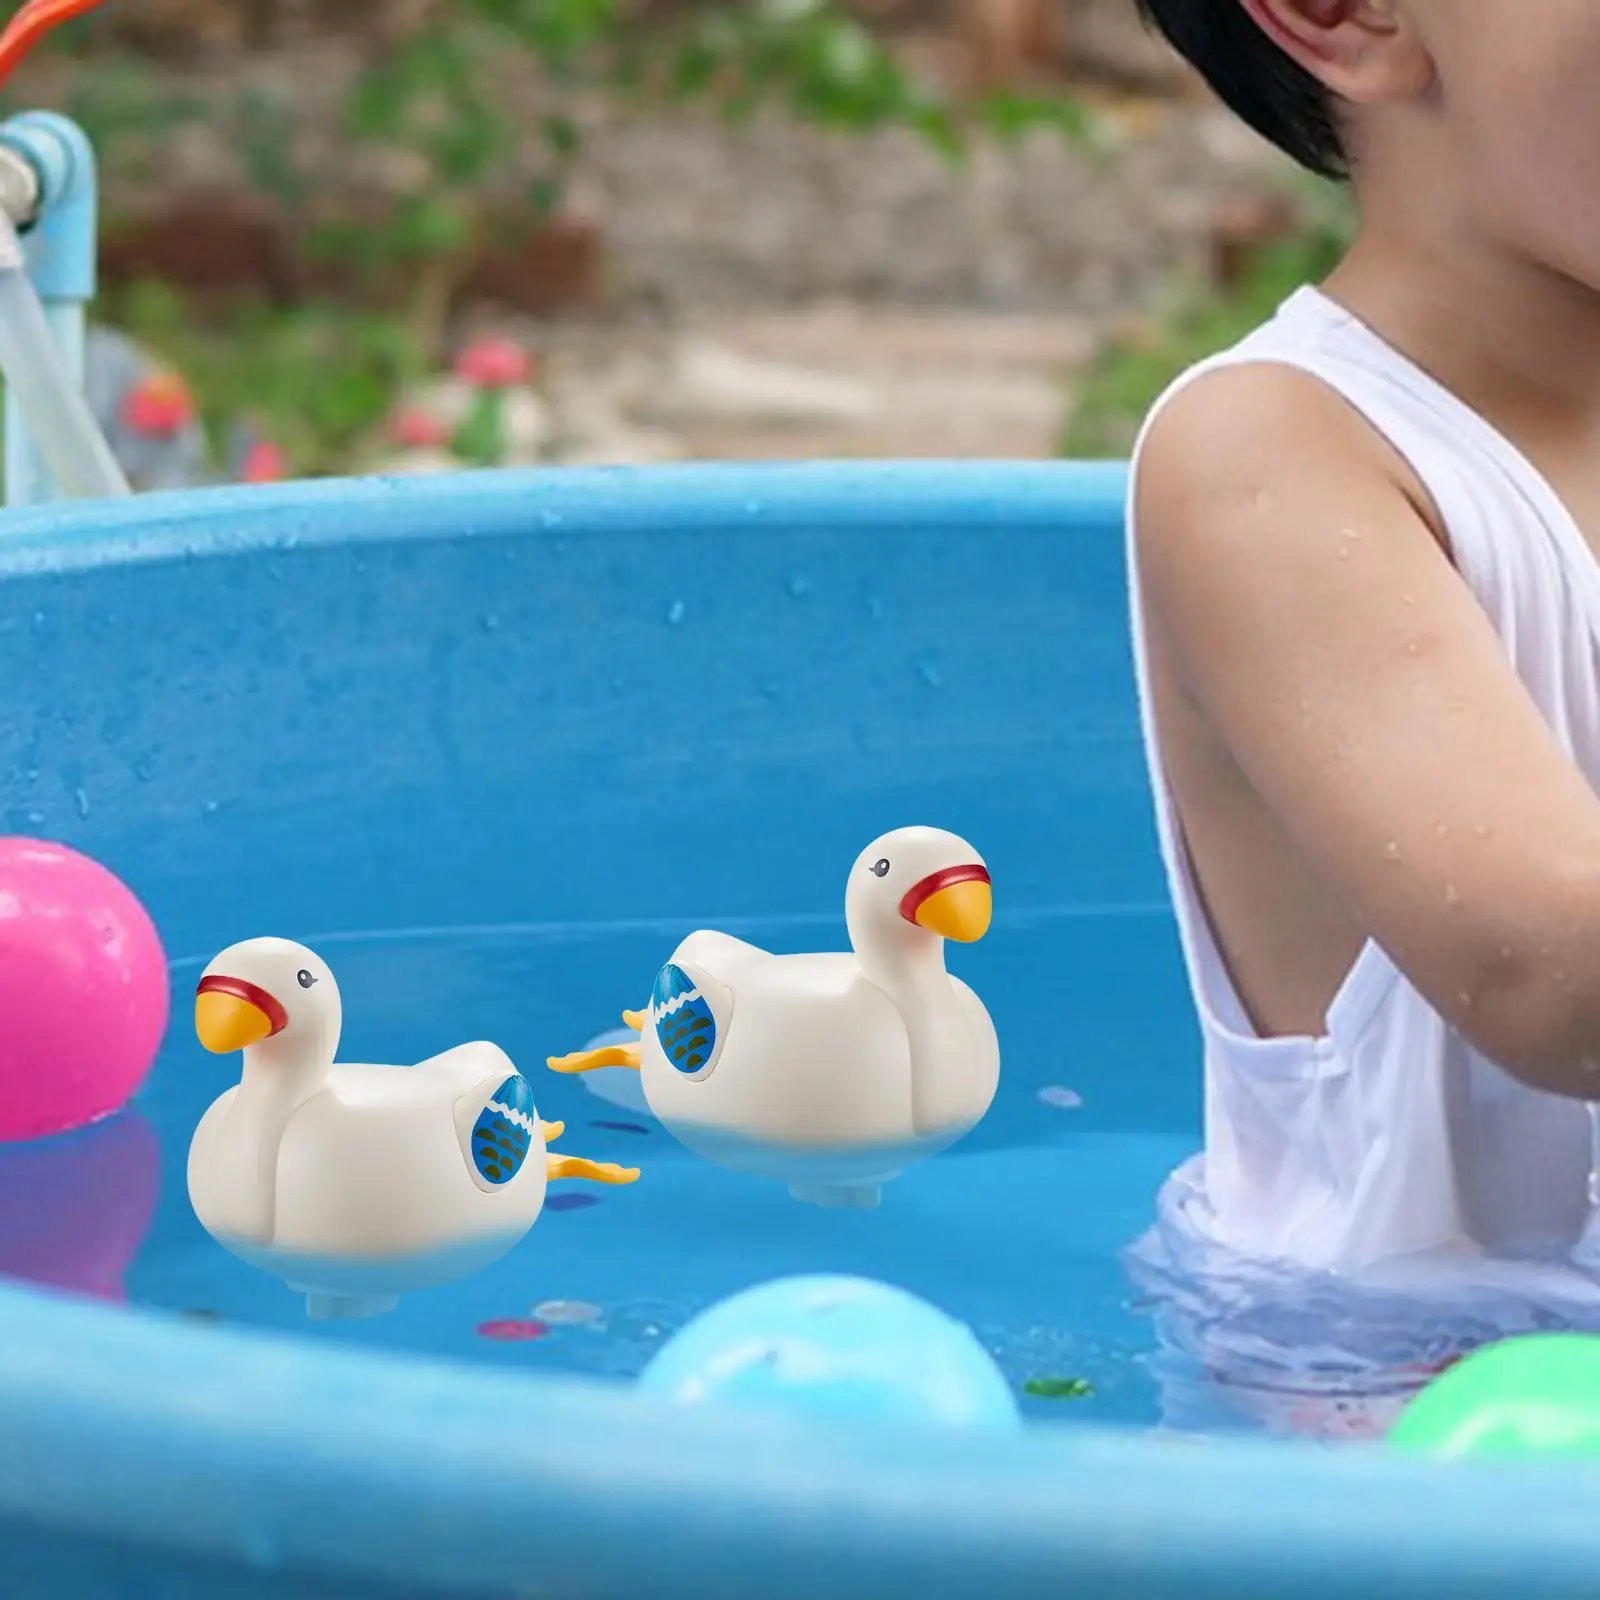 Fun Swan Bath Toys pool Time Outdoor Activities Toy Water Spraying bath Animal Bath Toy for Swimming